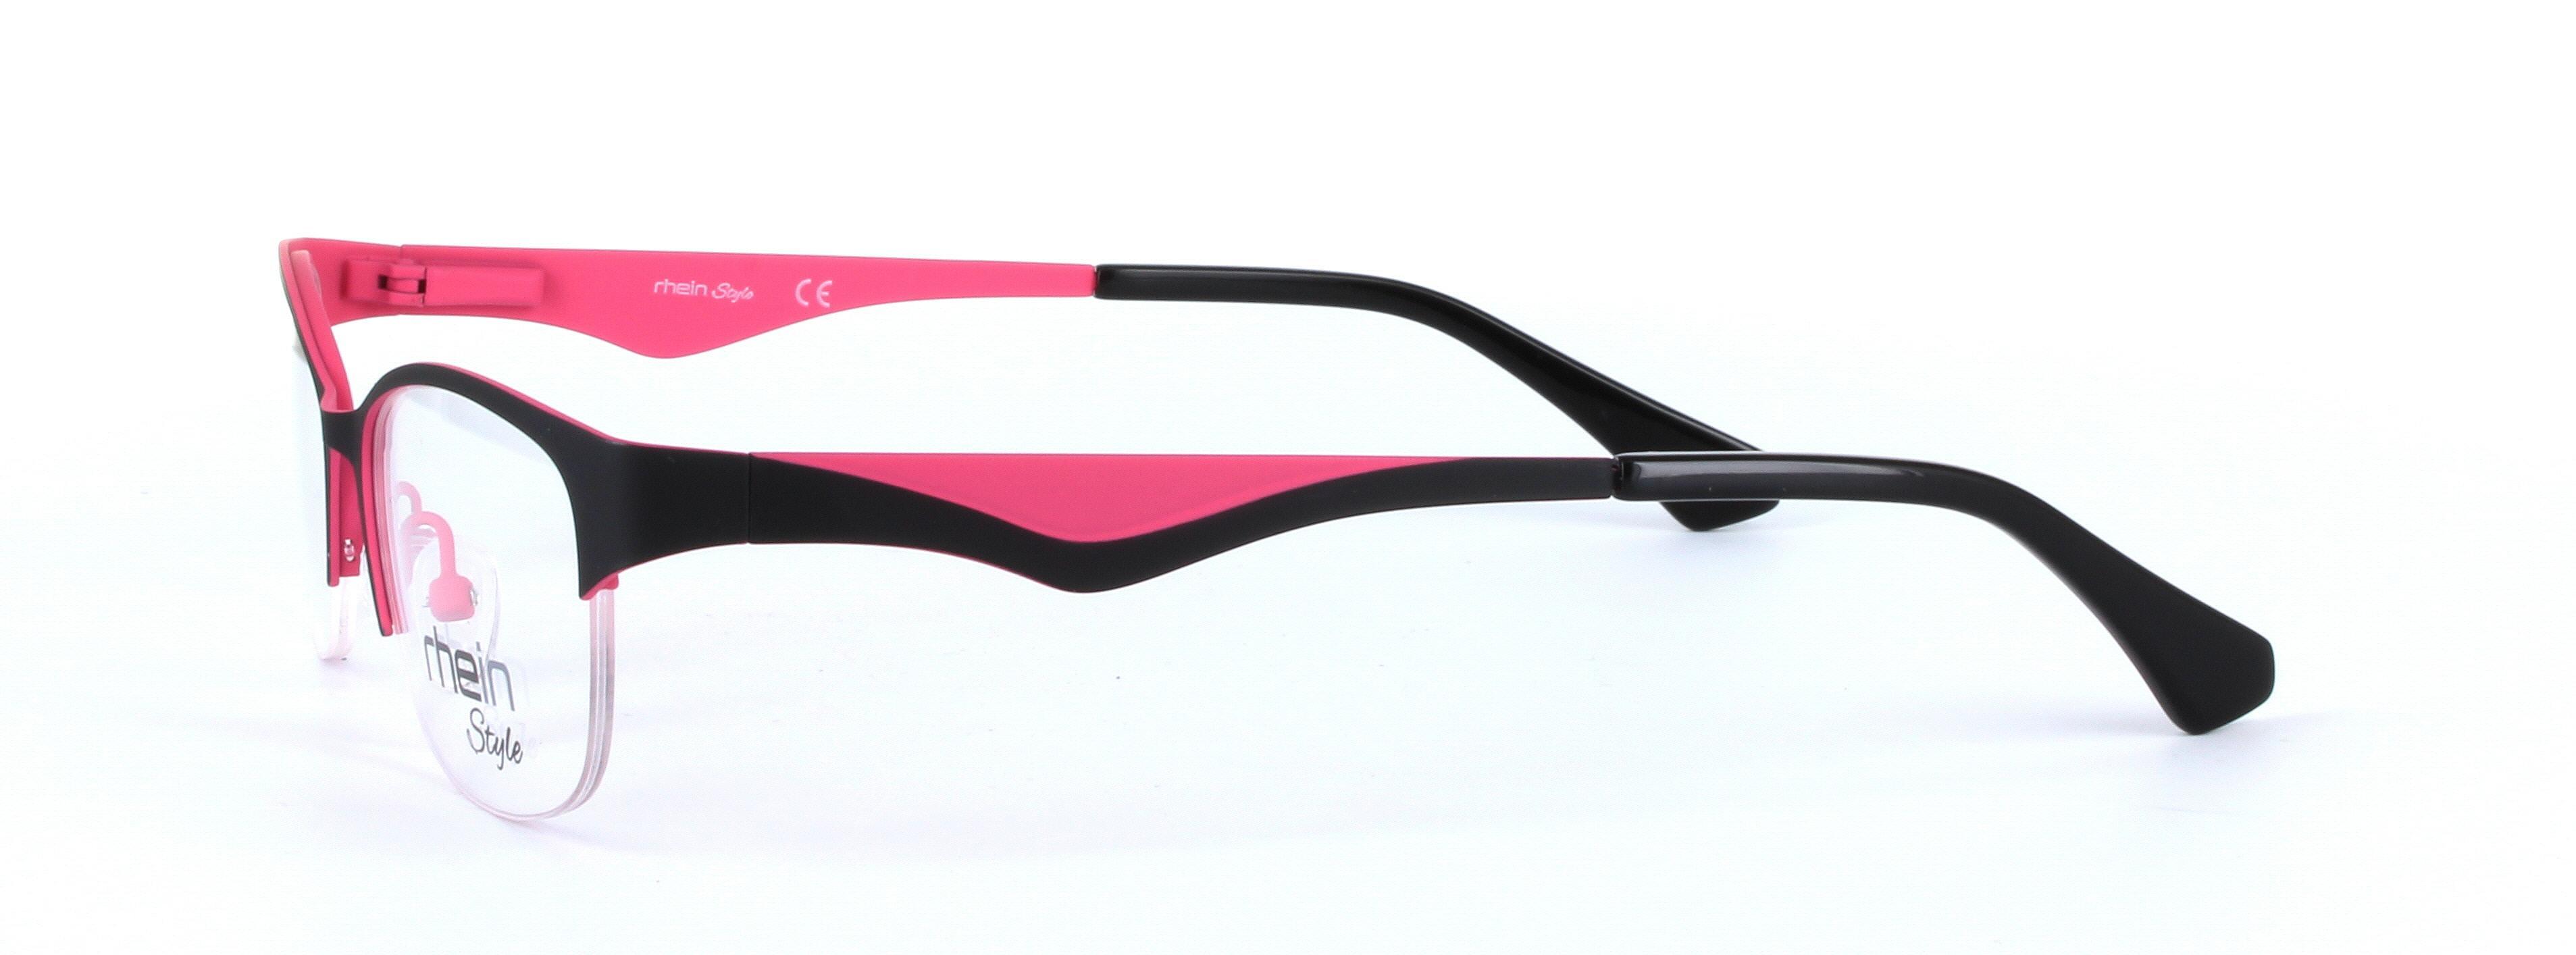 Kelly Black and Pink Semi Rimless Oval Rectangular Metal Glasses - Image View 2